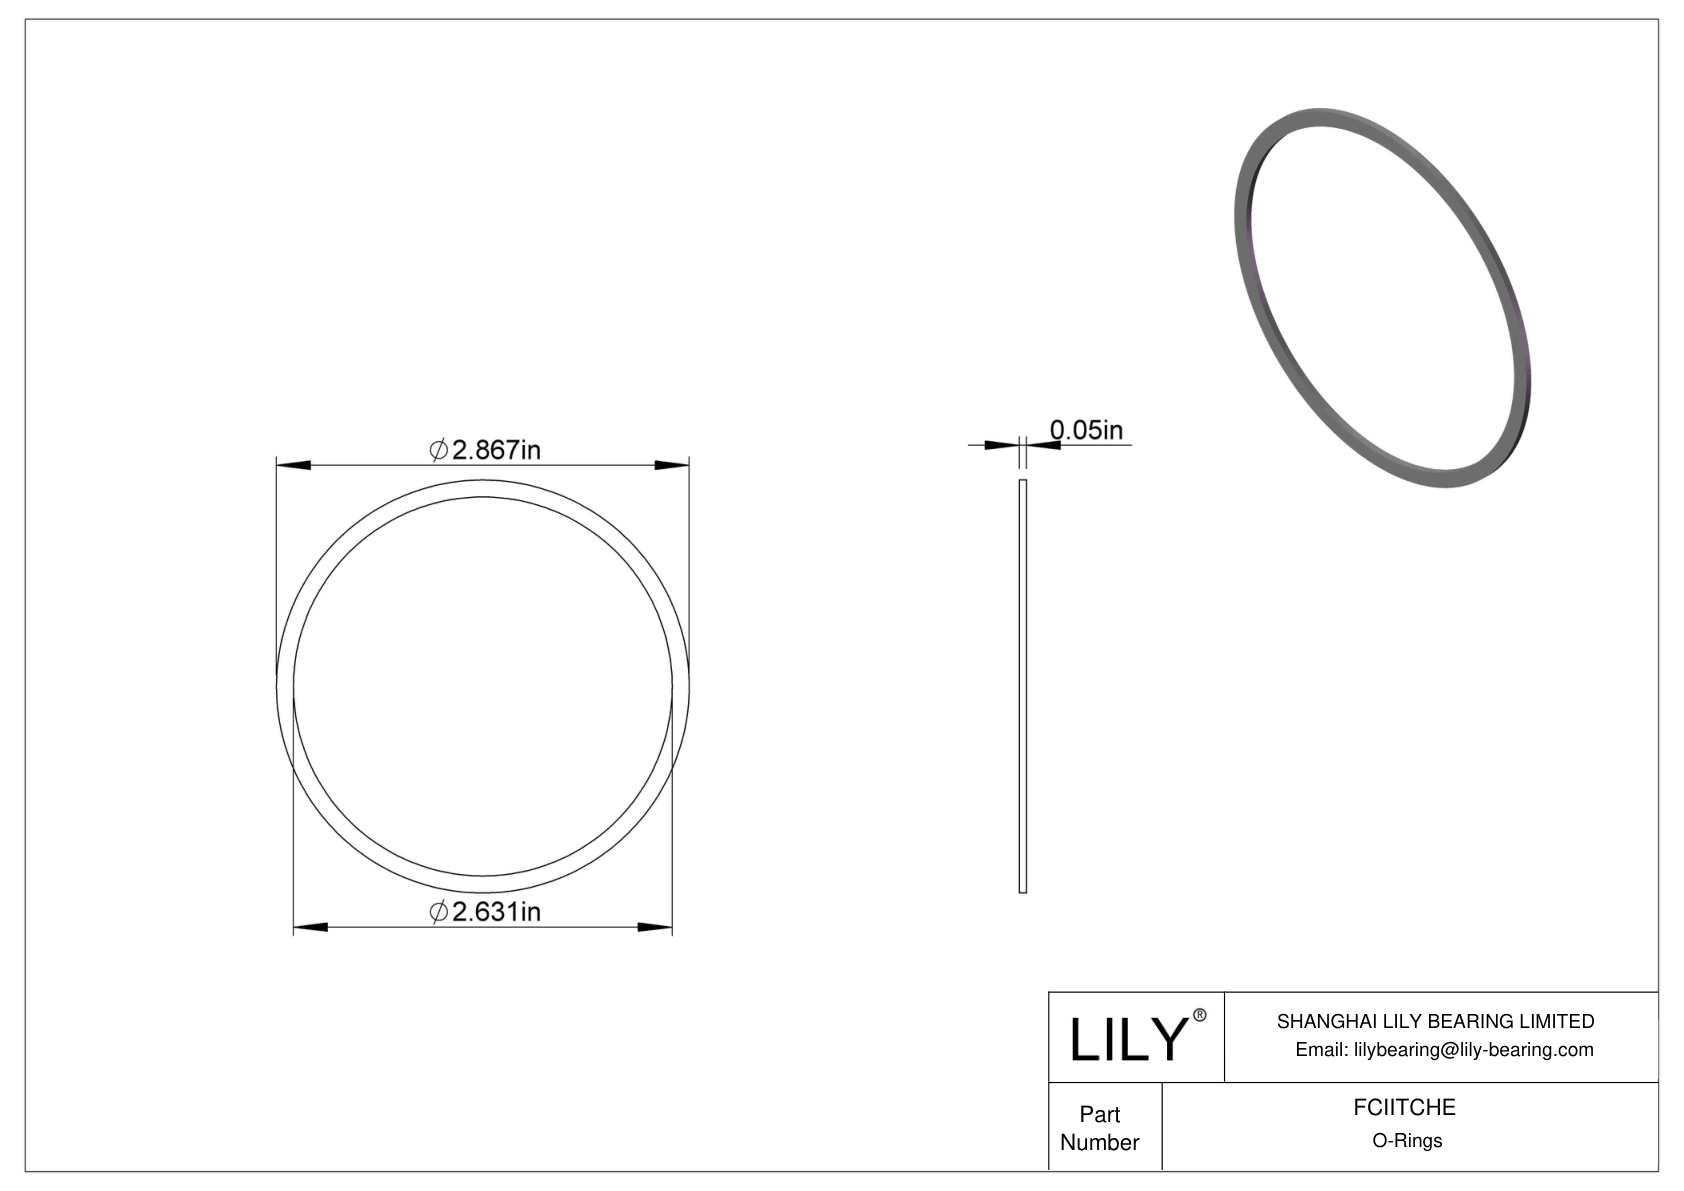 FCIITCHE O-Ring Backup Rings cad drawing